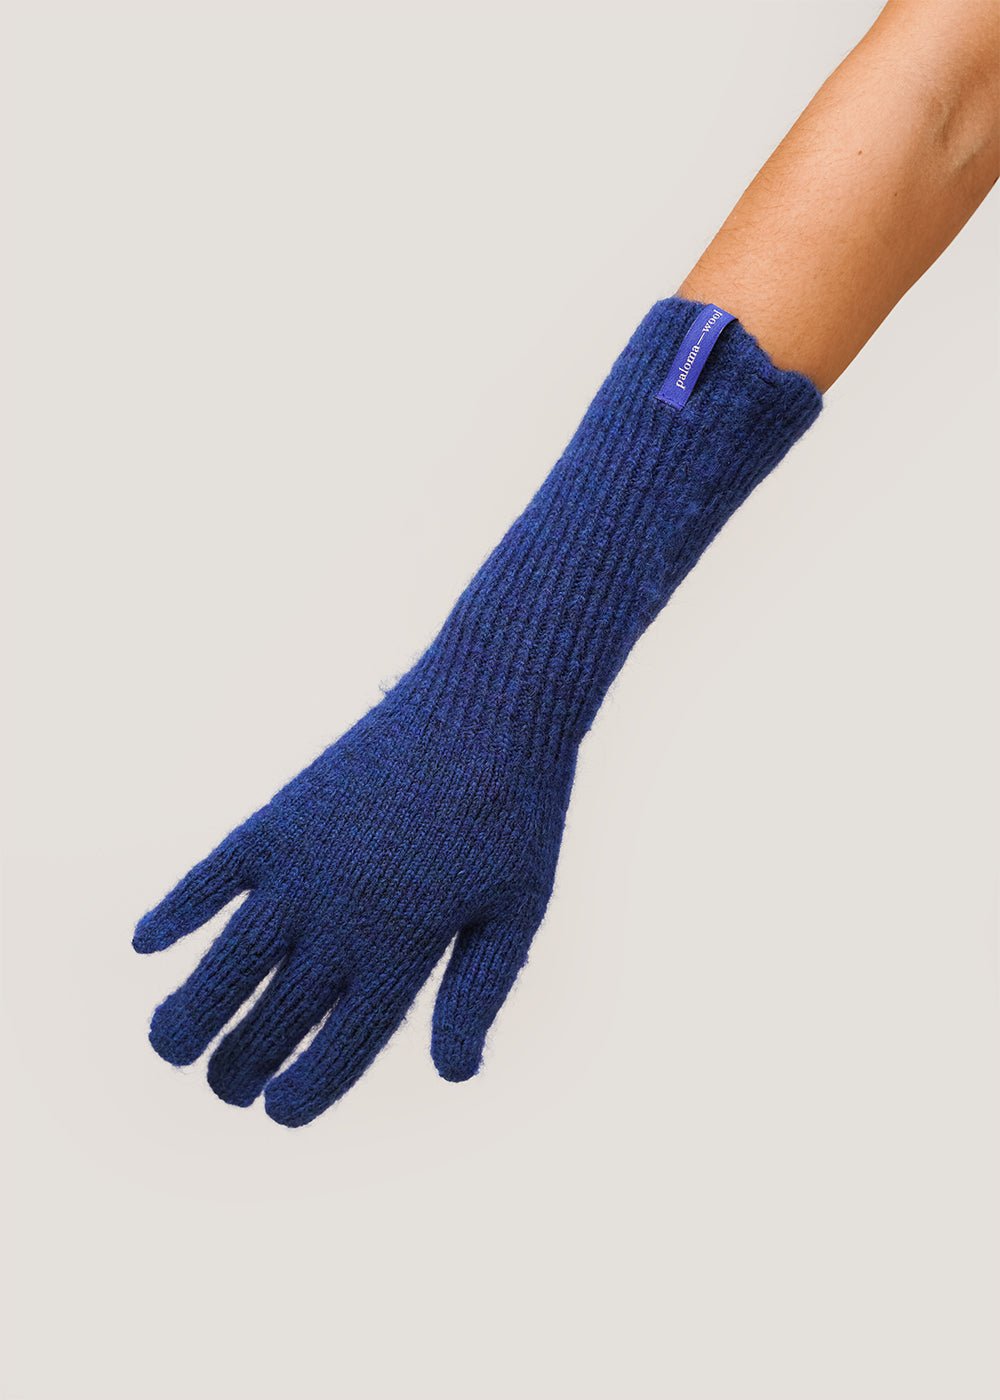 Paloma Wool Blue Peter Gloves - New Classics Studios Sustainable Ethical Fashion Canada